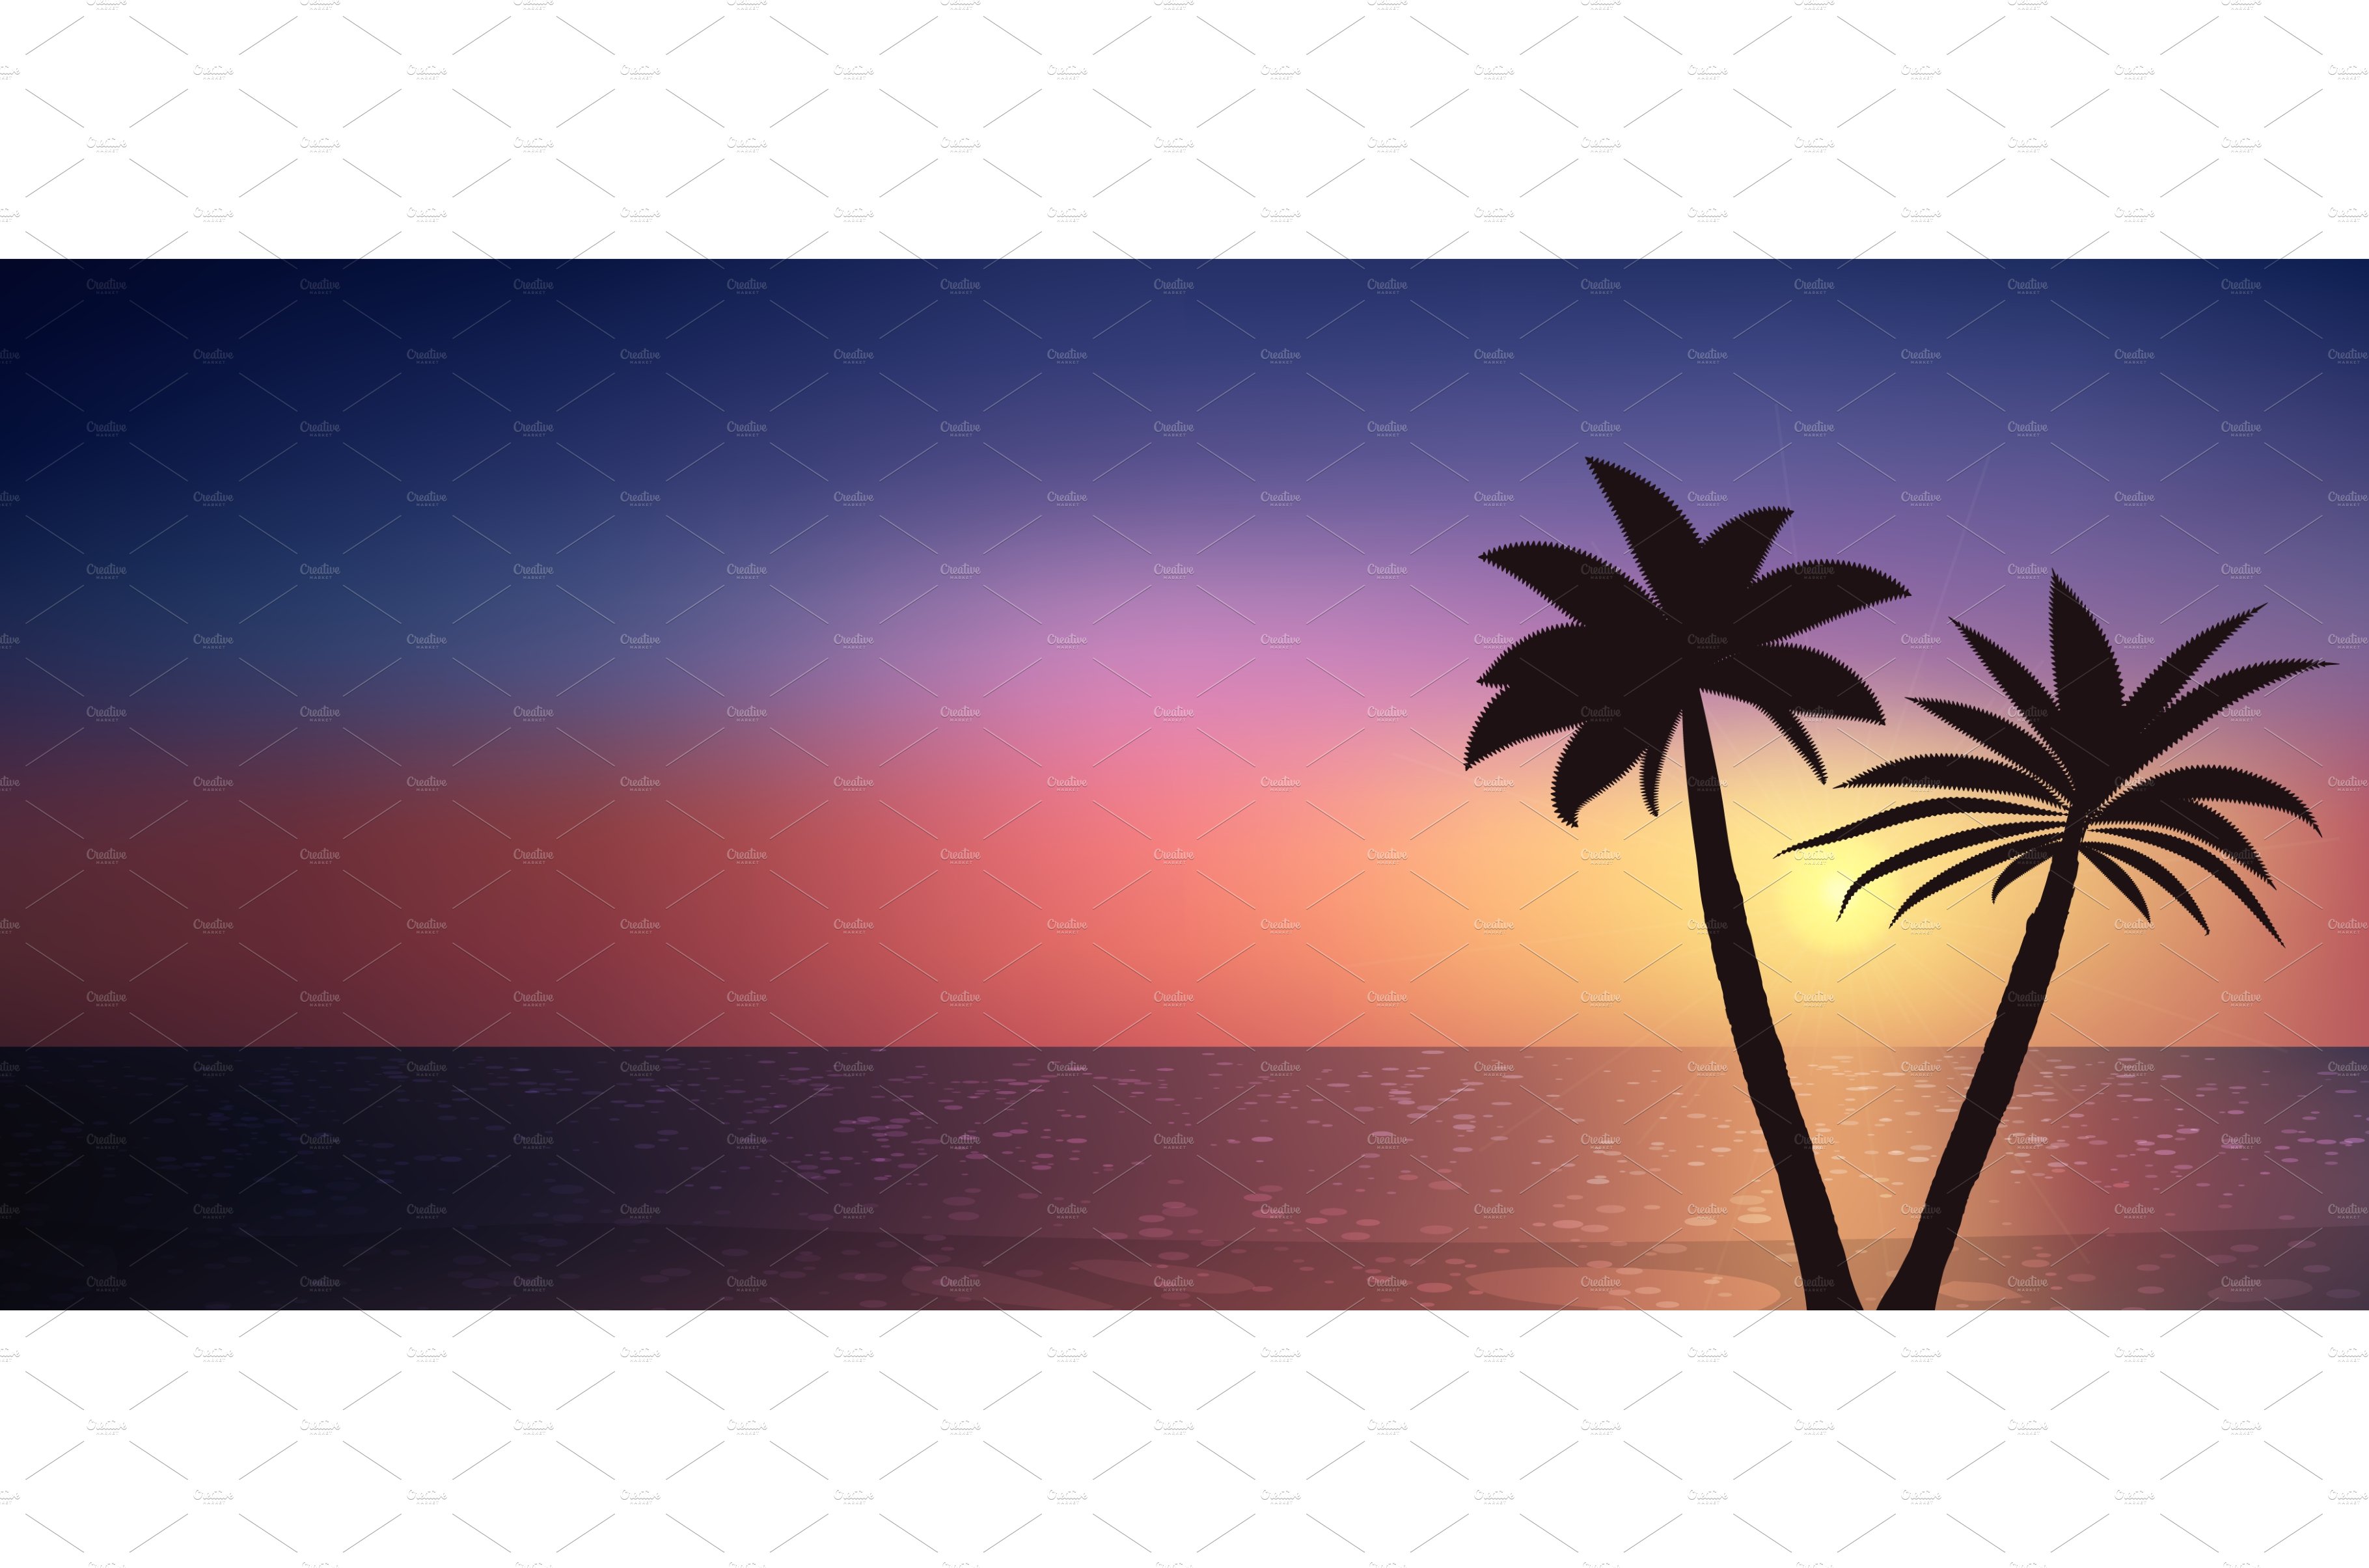 Silhouette of palm trees on a cover image.